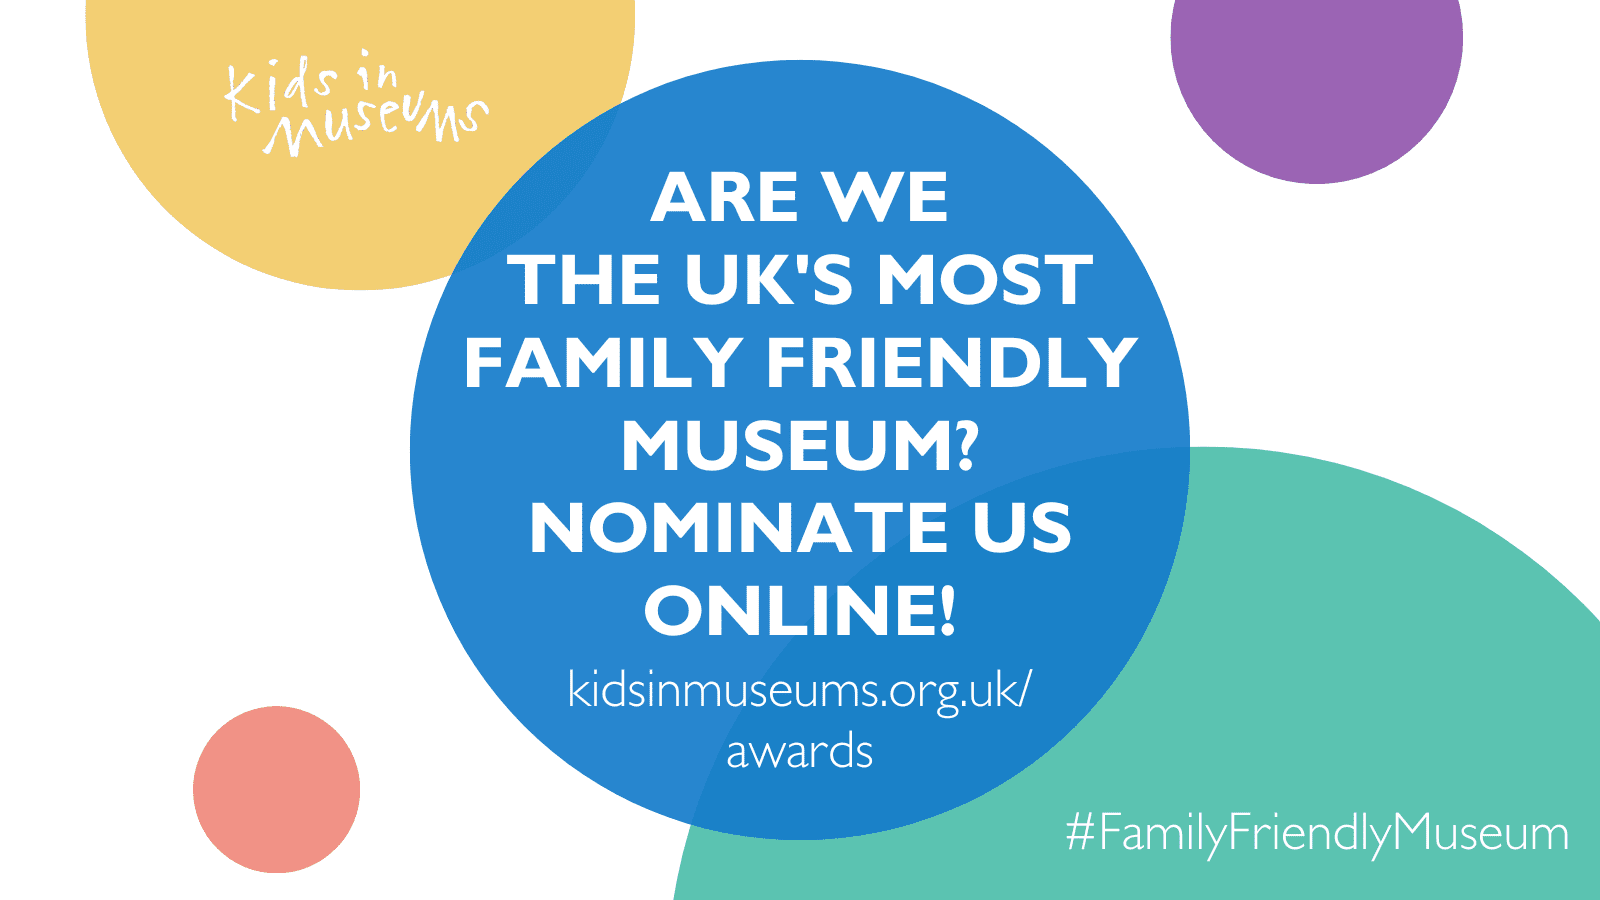 Nominate us for the Family Friendly Museum Award!